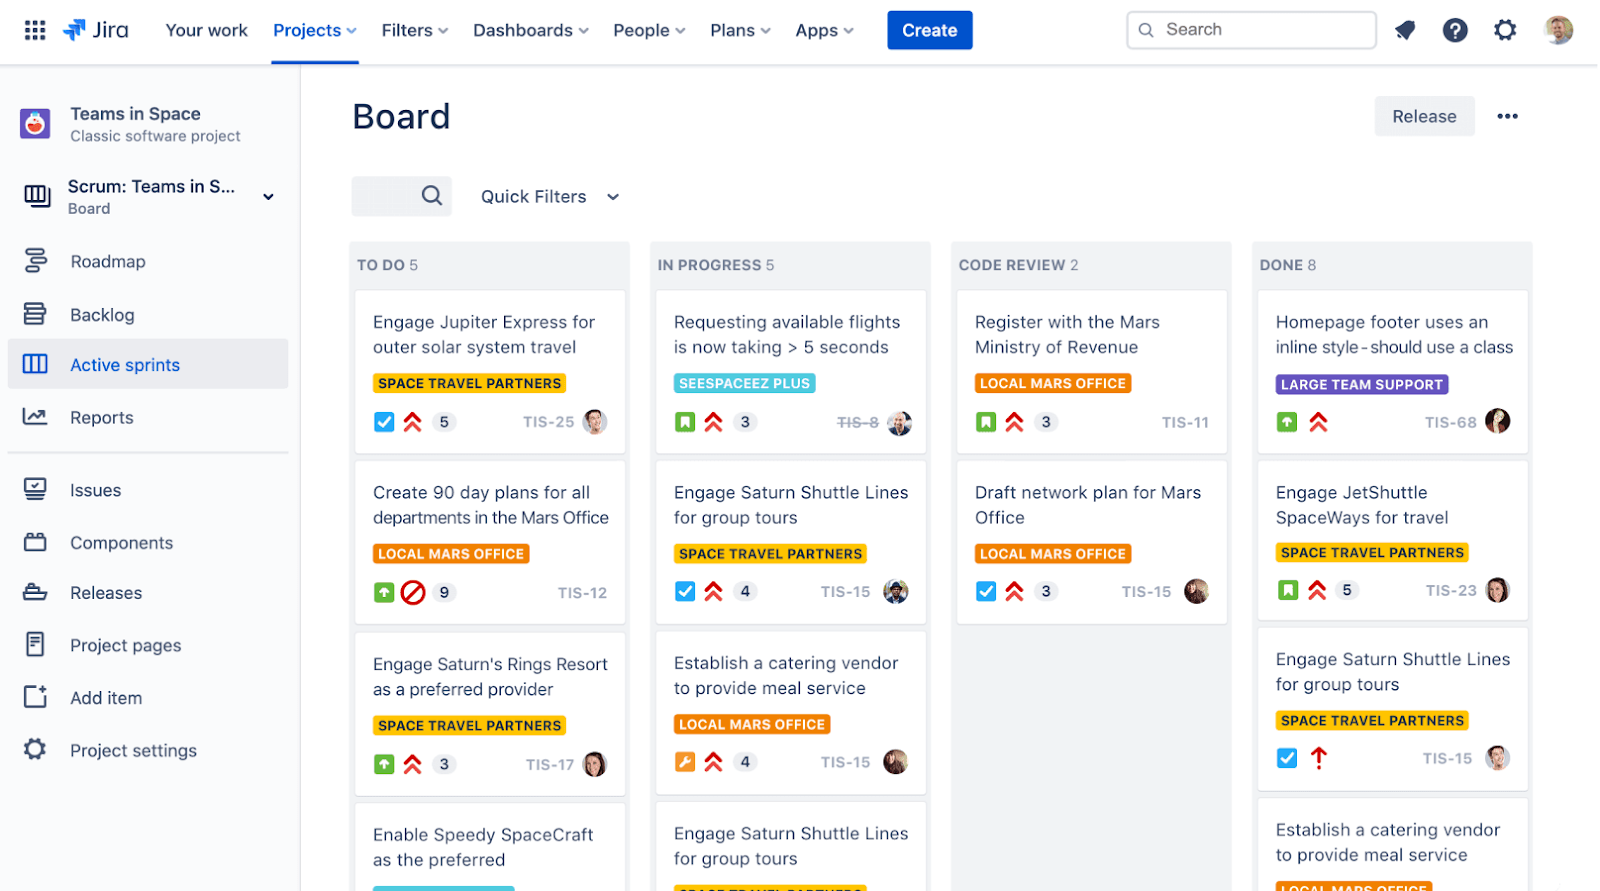 Jira is great project management software